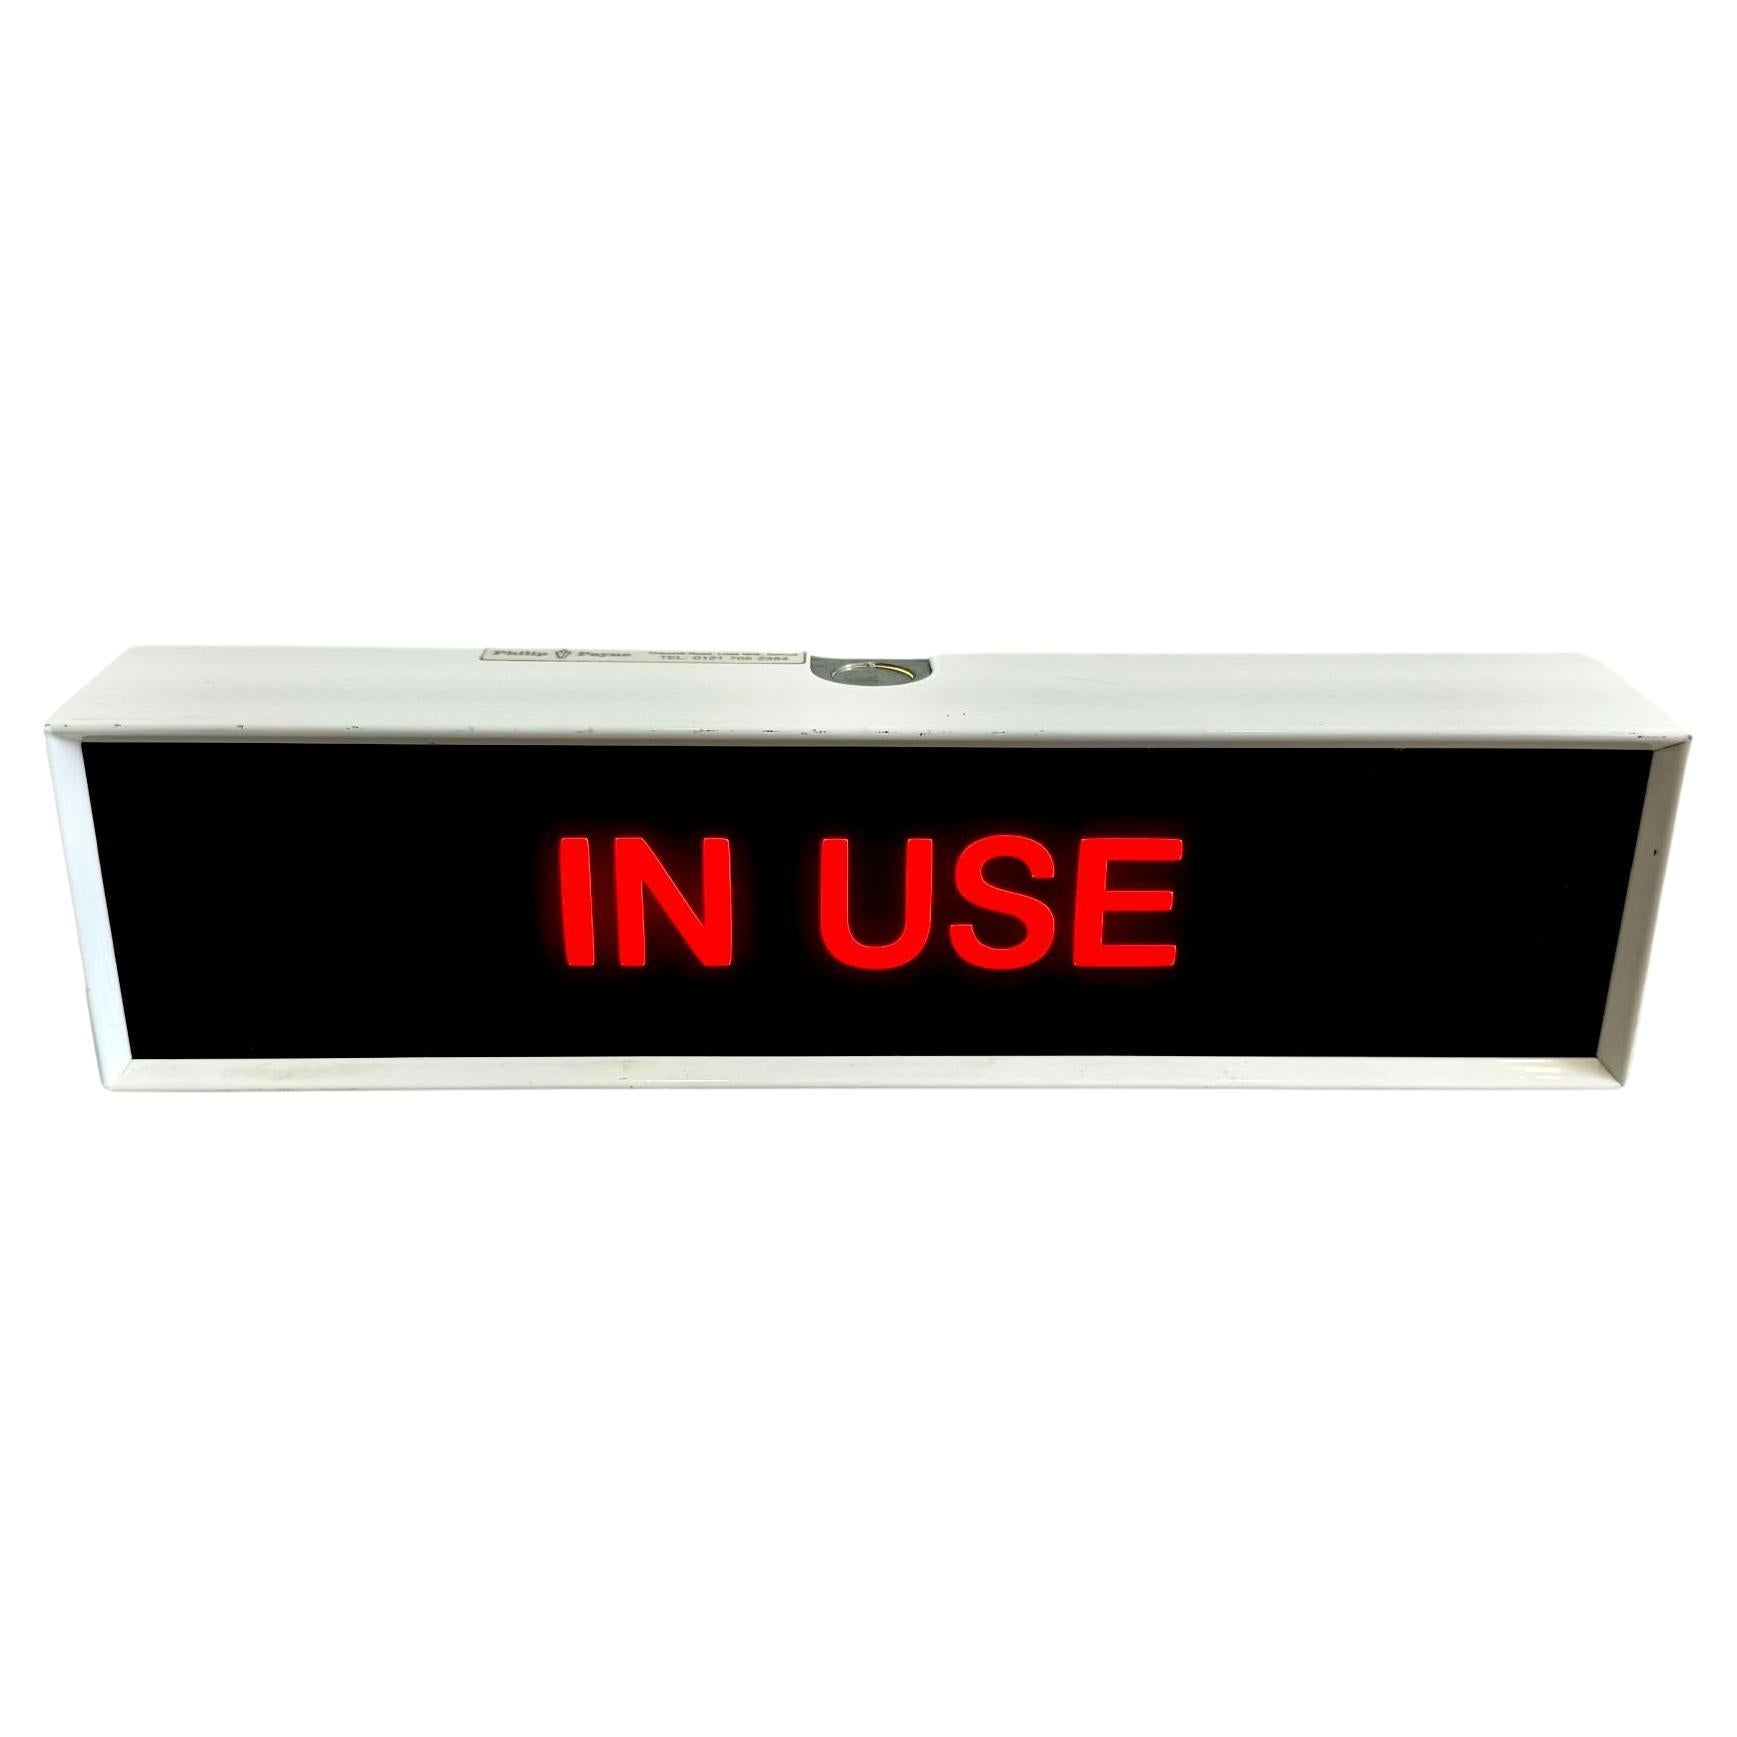 Vintage 'IN USE' Illuminated Sign, 1980s England For Sale